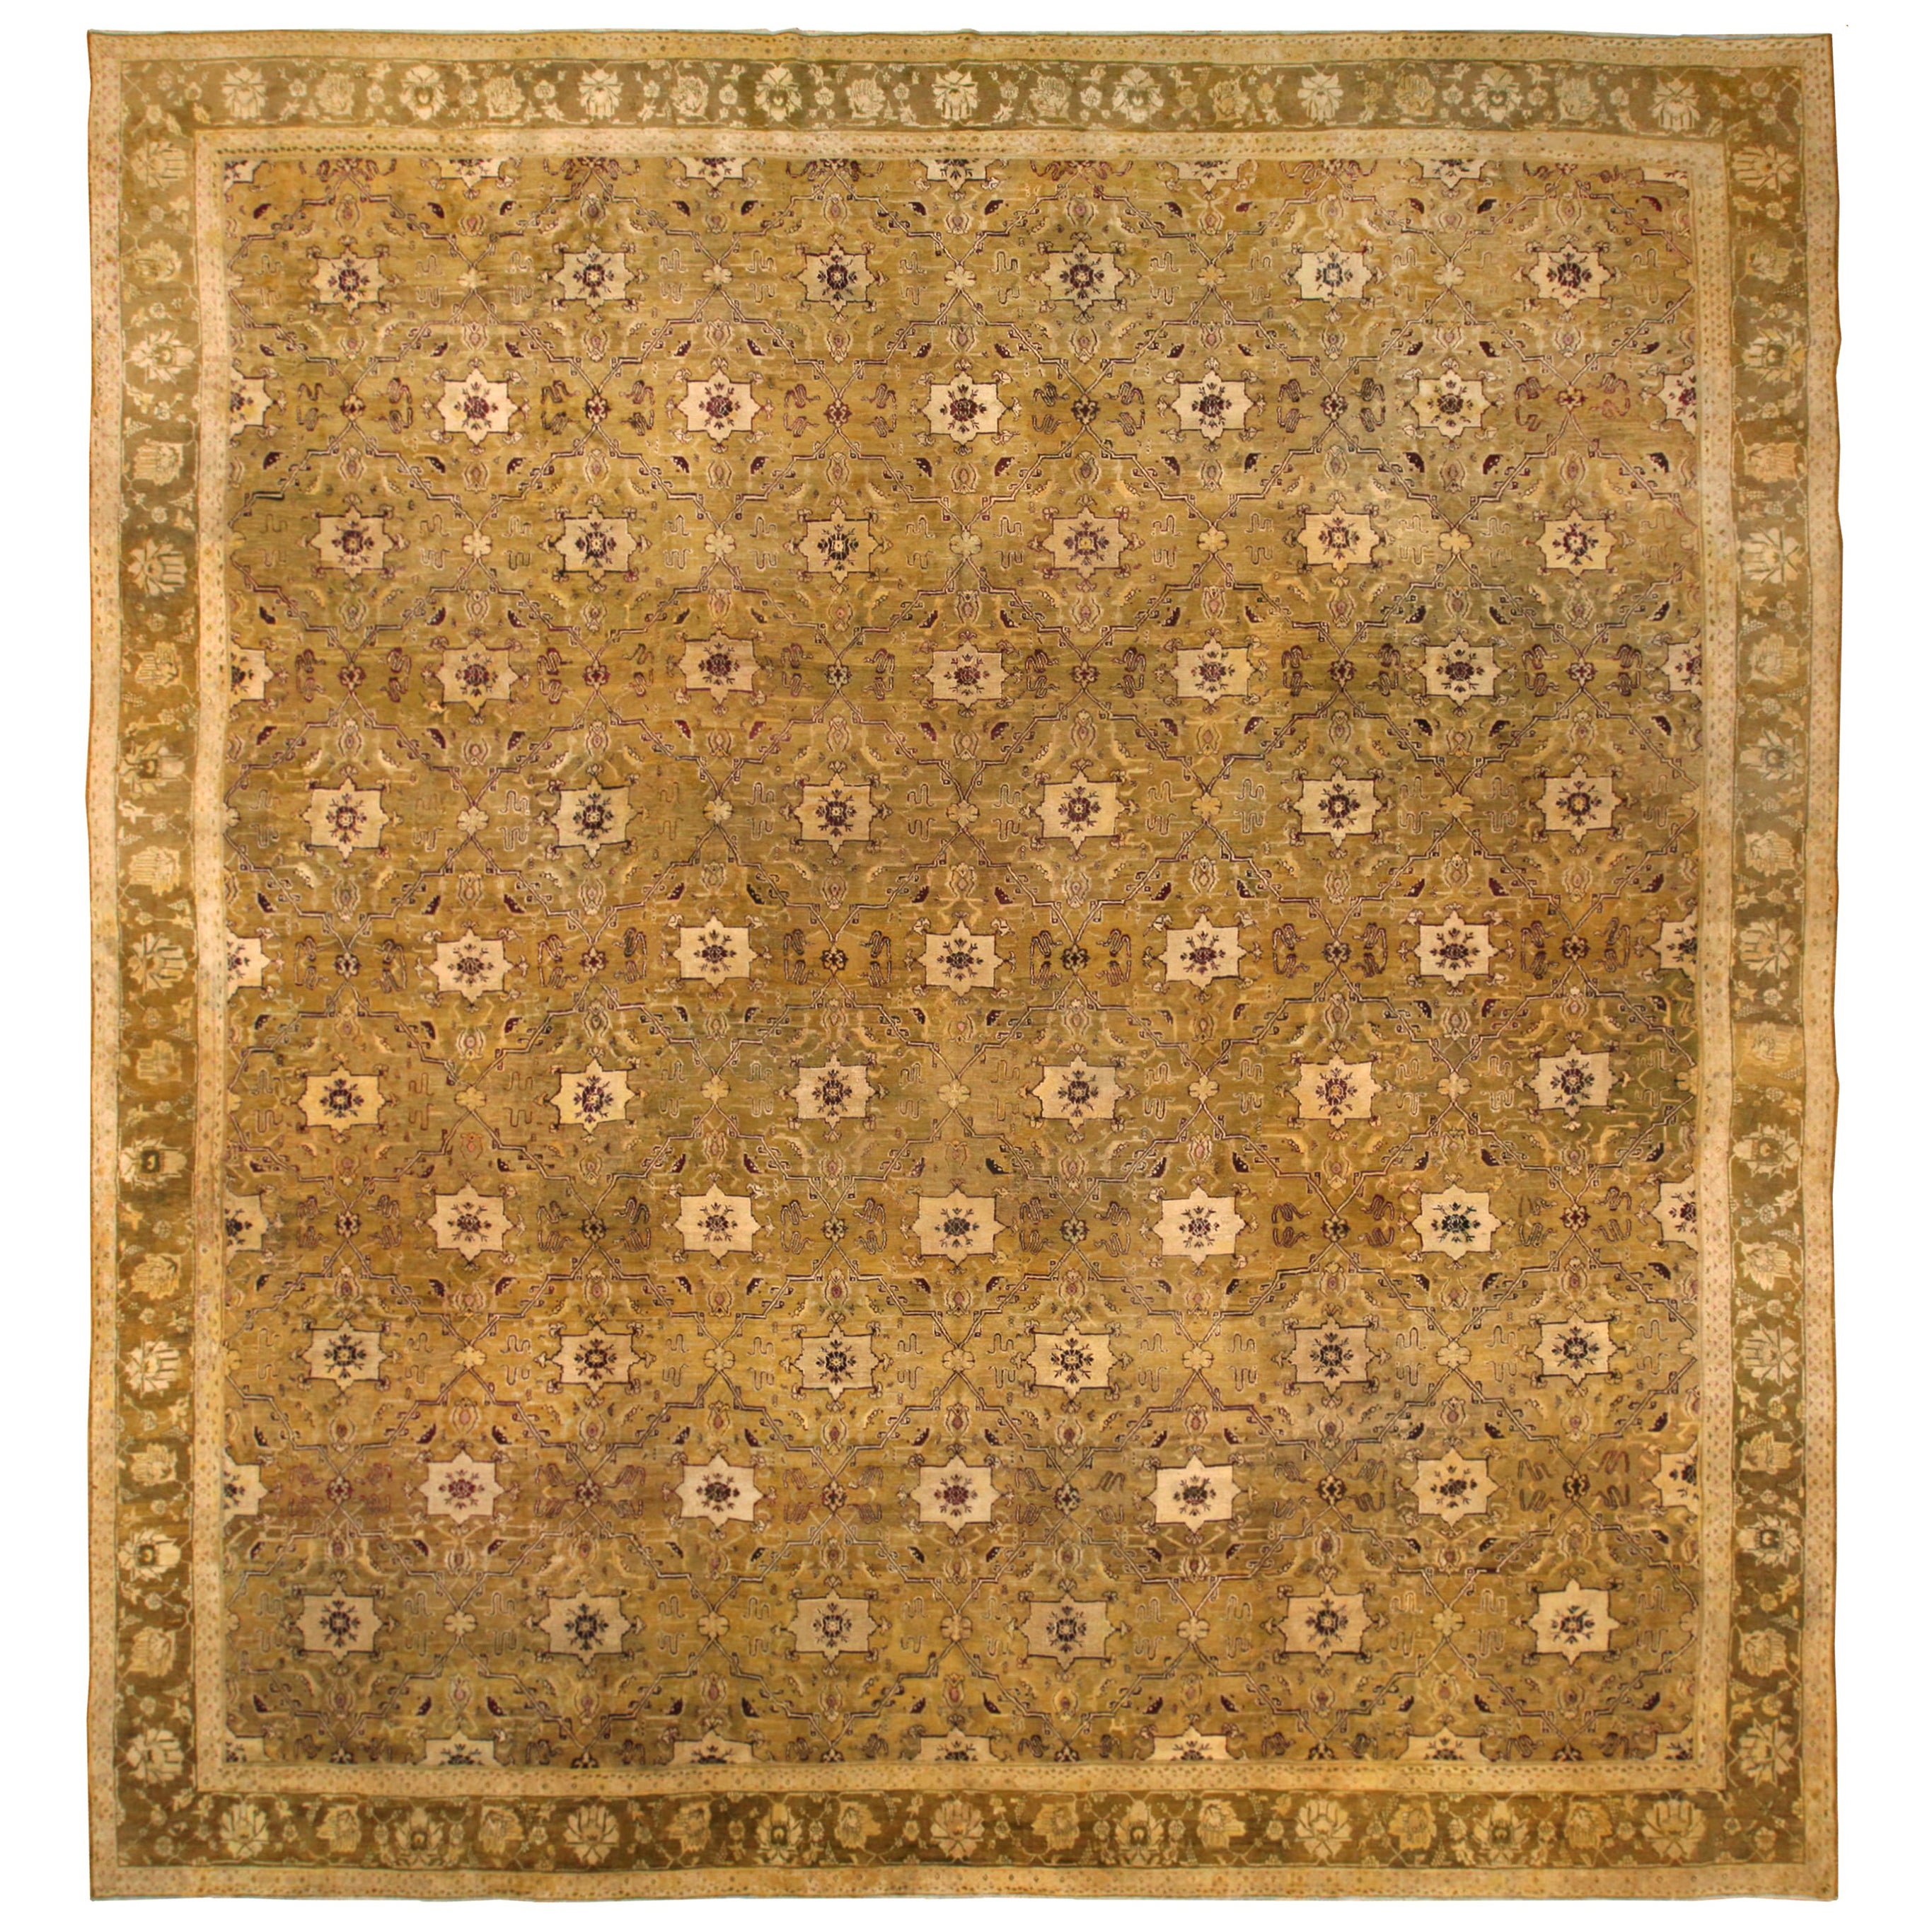 Large Antique Indian Agra Rug. Size: 17 ft 3 in x 18 ft 2 in For Sale